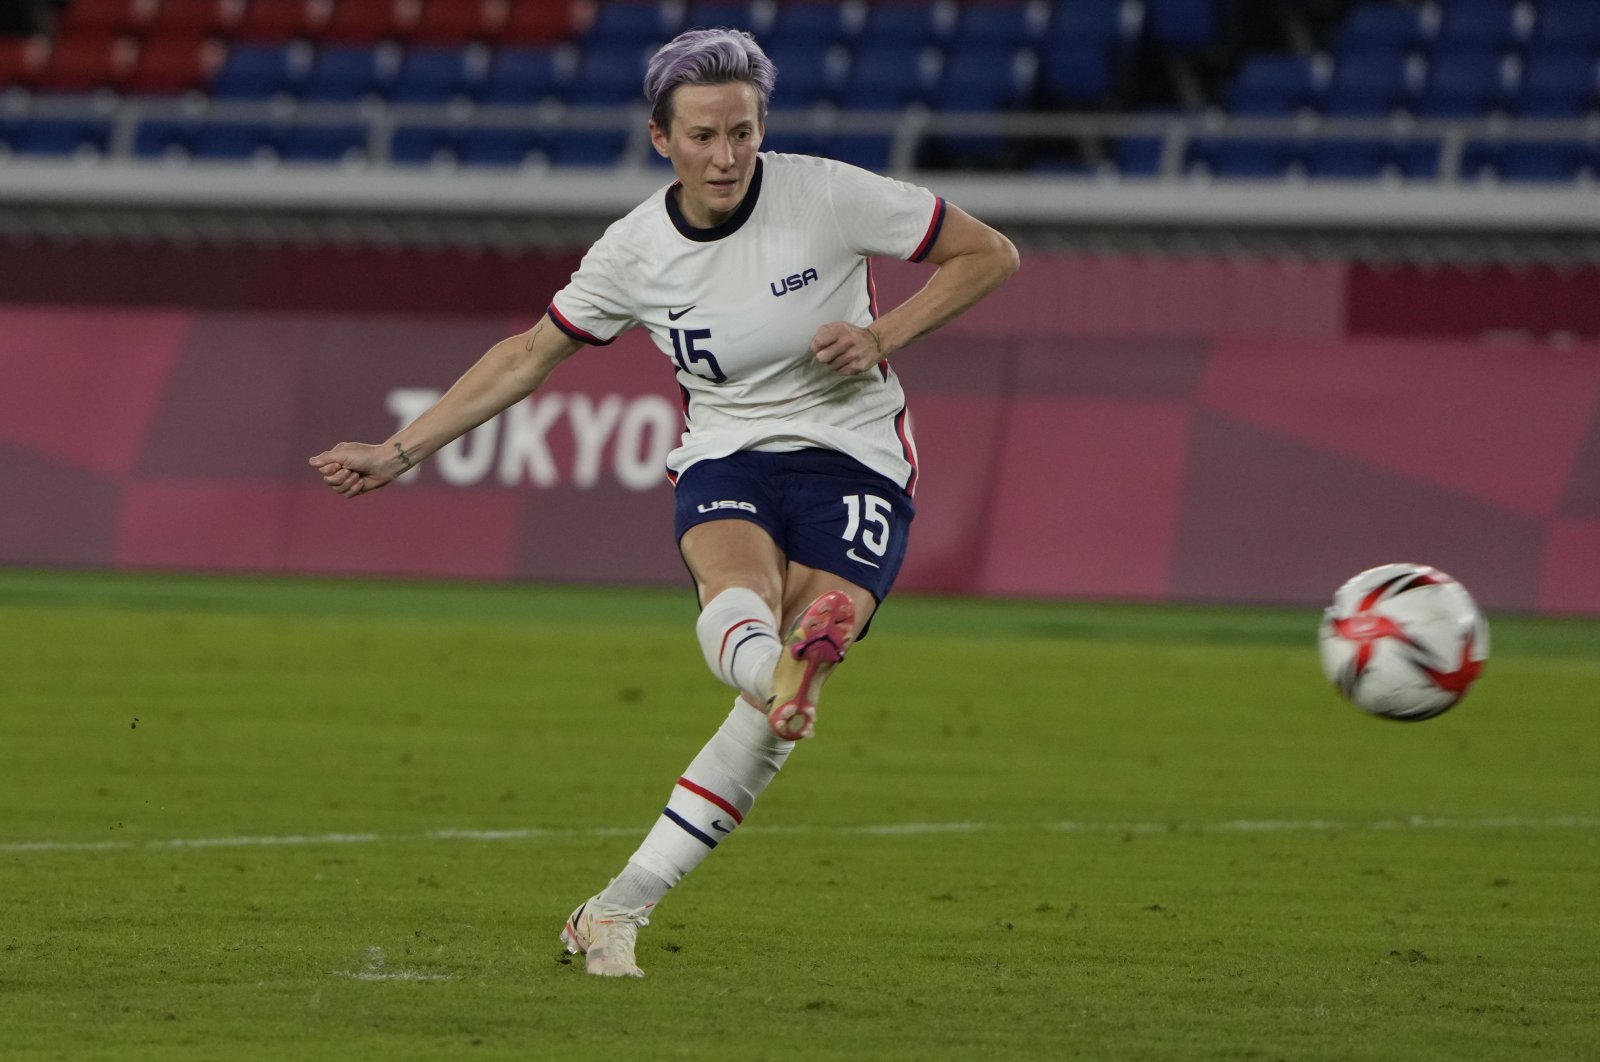 United States' Megan Rapinoe scores the winning goal against the Netherlands in a penalty shootout during a women's quarterfinal soccer match at the 2020 Summer Olympics, Yokohama, Japan, July 30, 2021. (AP Photo)